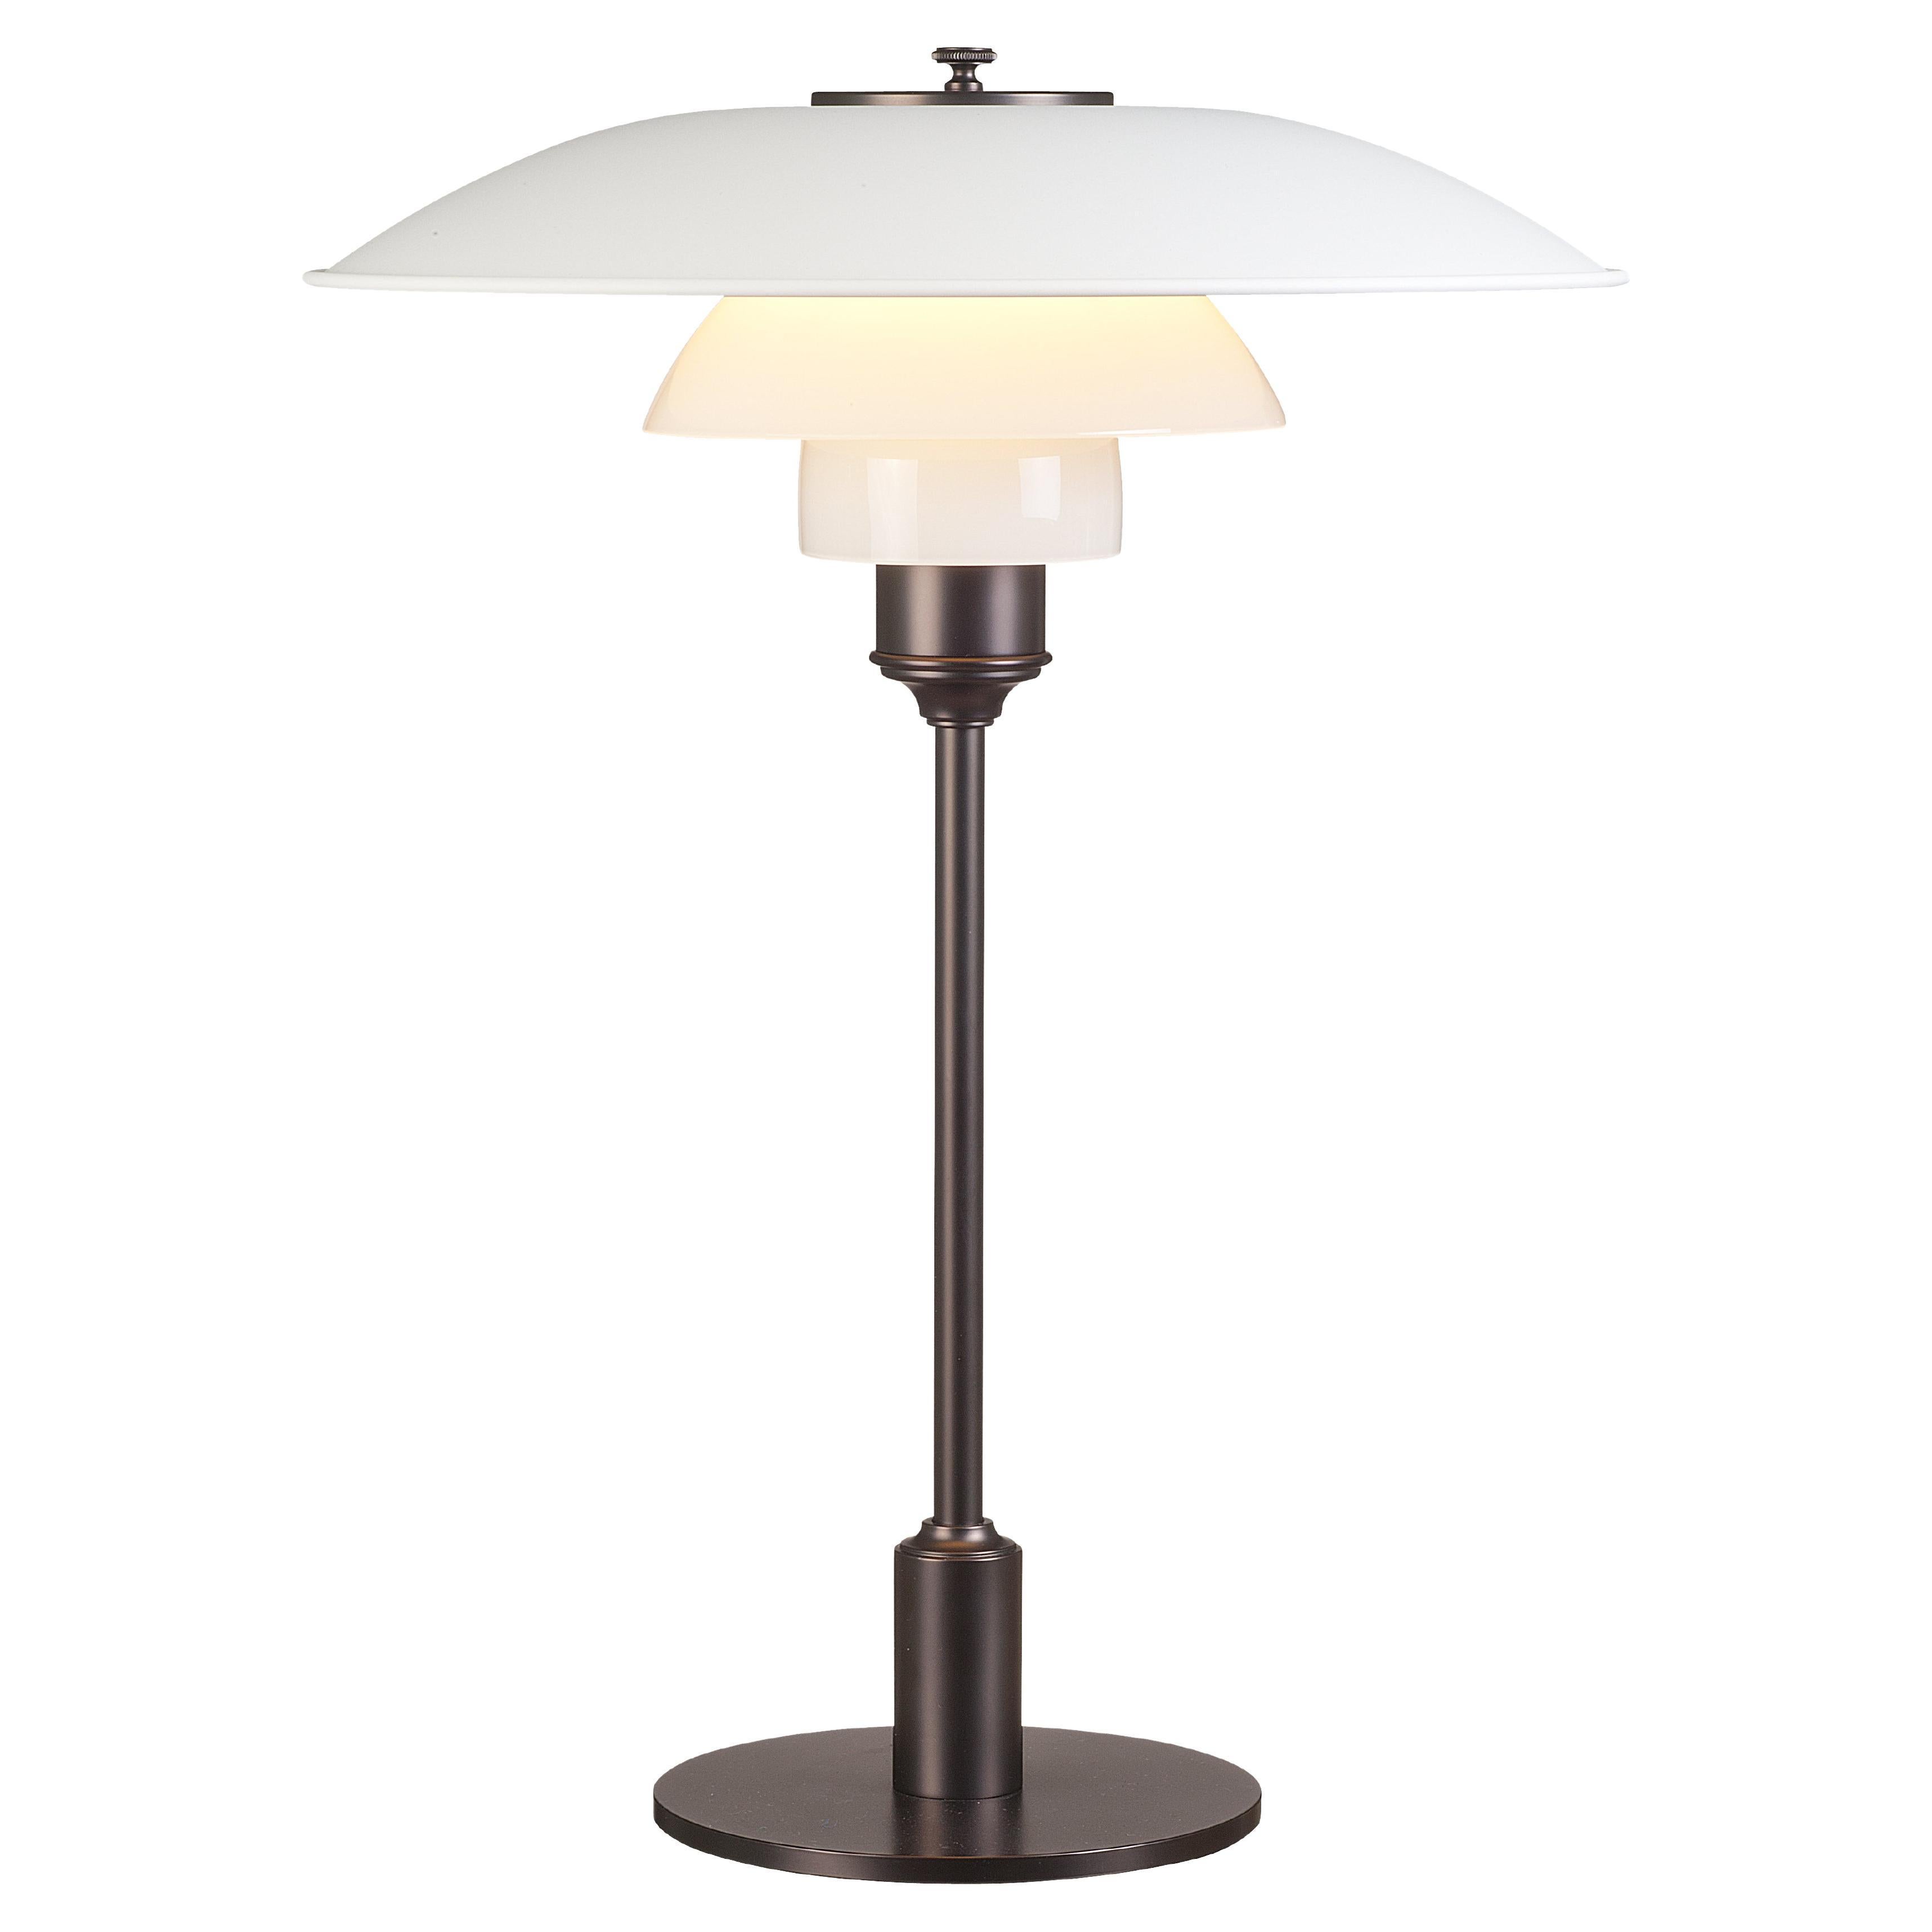 Poul Henningsen PH 3½-2½ table lamp for Louis Poulsen, Denmark.

Poul Henning Sen’s legendary design stems from his own, brilliant three-shade system from late 1920s. Poul Henningsen original design from this period was highly functional, some